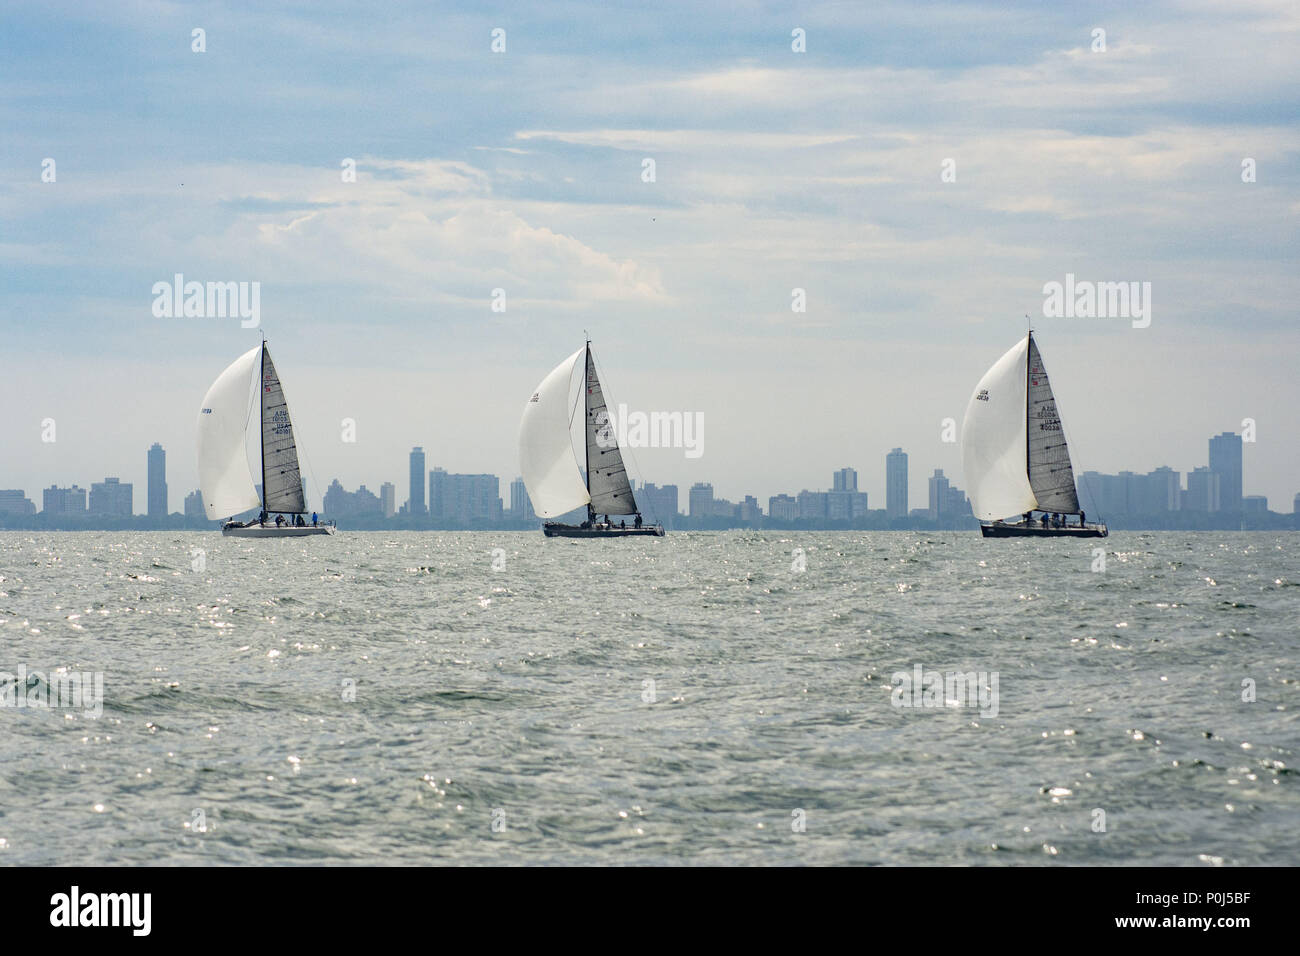 Chicago, IL, USA. 8th June, 2018. The National Offshore One Design 2018 regatta takes place in Chicago from June 8 to June 10. Yachtsmen on more than a 100 boats gather to test their sailling knowledge against each other. There are 3 circles of different fleets racing . On Saturday, some of the boats go on a long distance race while the others race around the marks set up by the race committee. Helly Hansen (clothingwear) is the principal sponsor. The races are organized by Sailing World Magazine with the Chicago Yacht Club acting as host for the event. (Credit Image: © Karen I. Hirsch Stock Photo